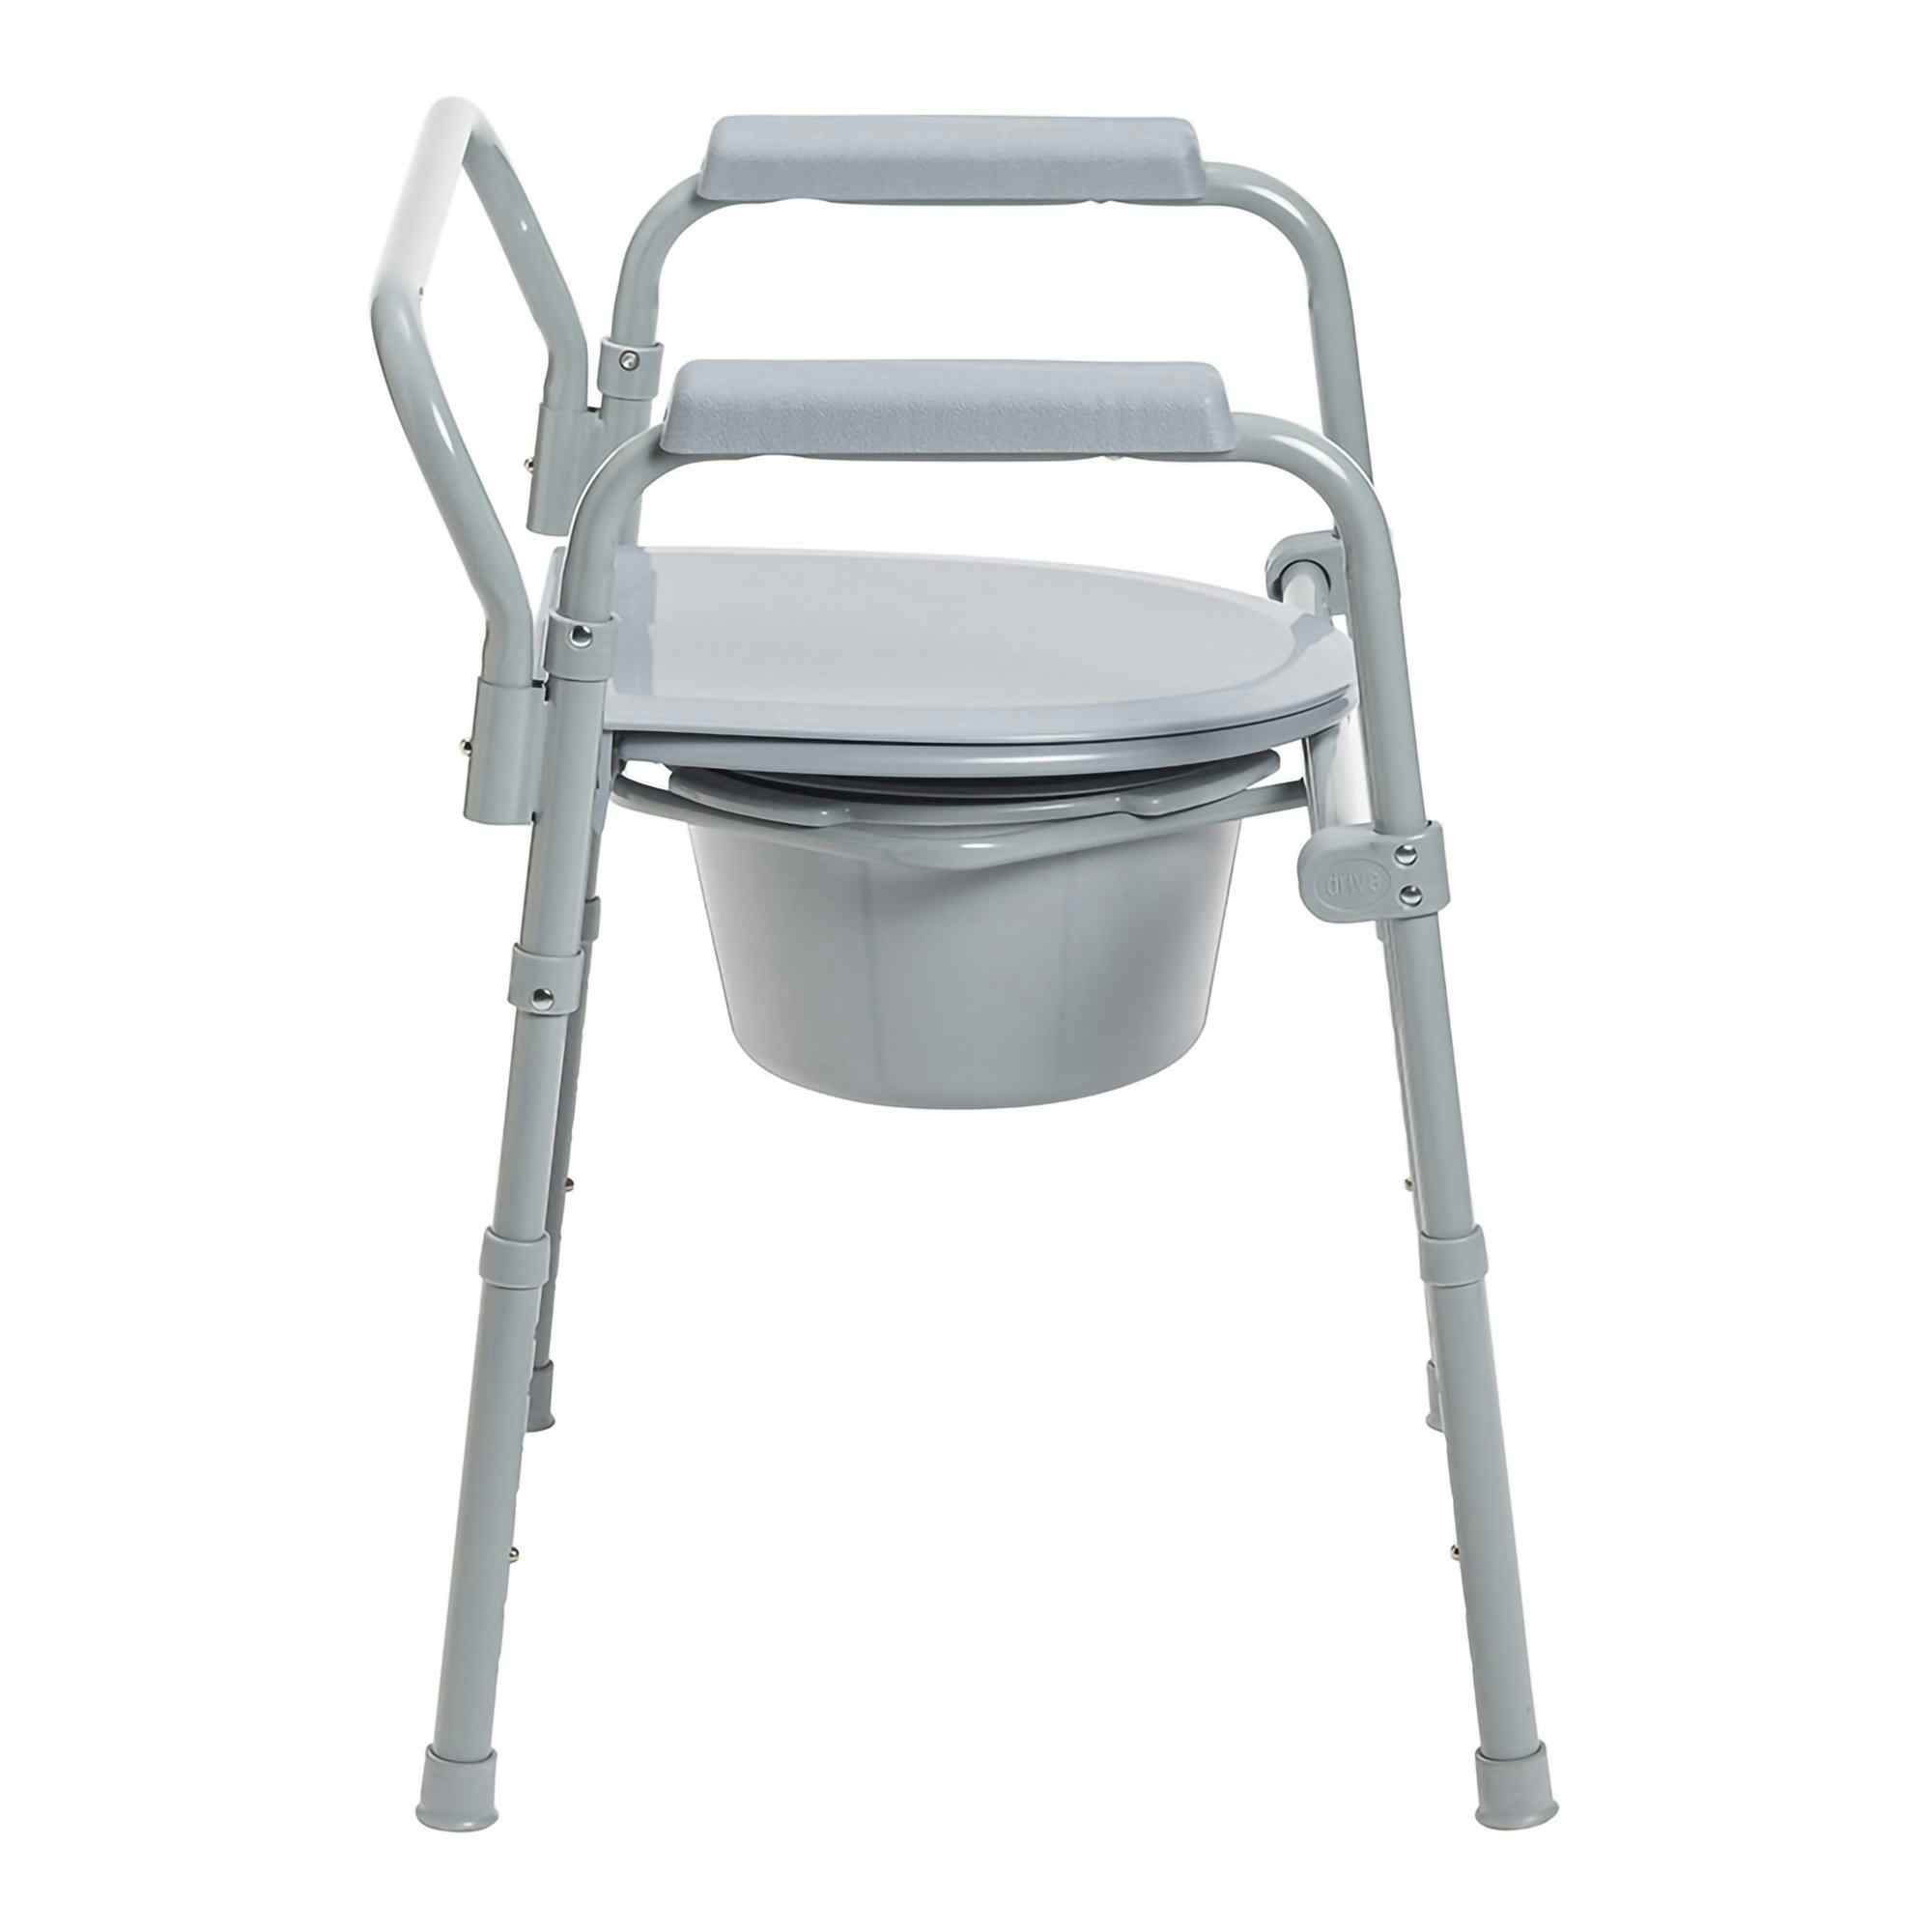 Image of McKesson Commode Chair with Fixed Arm product left